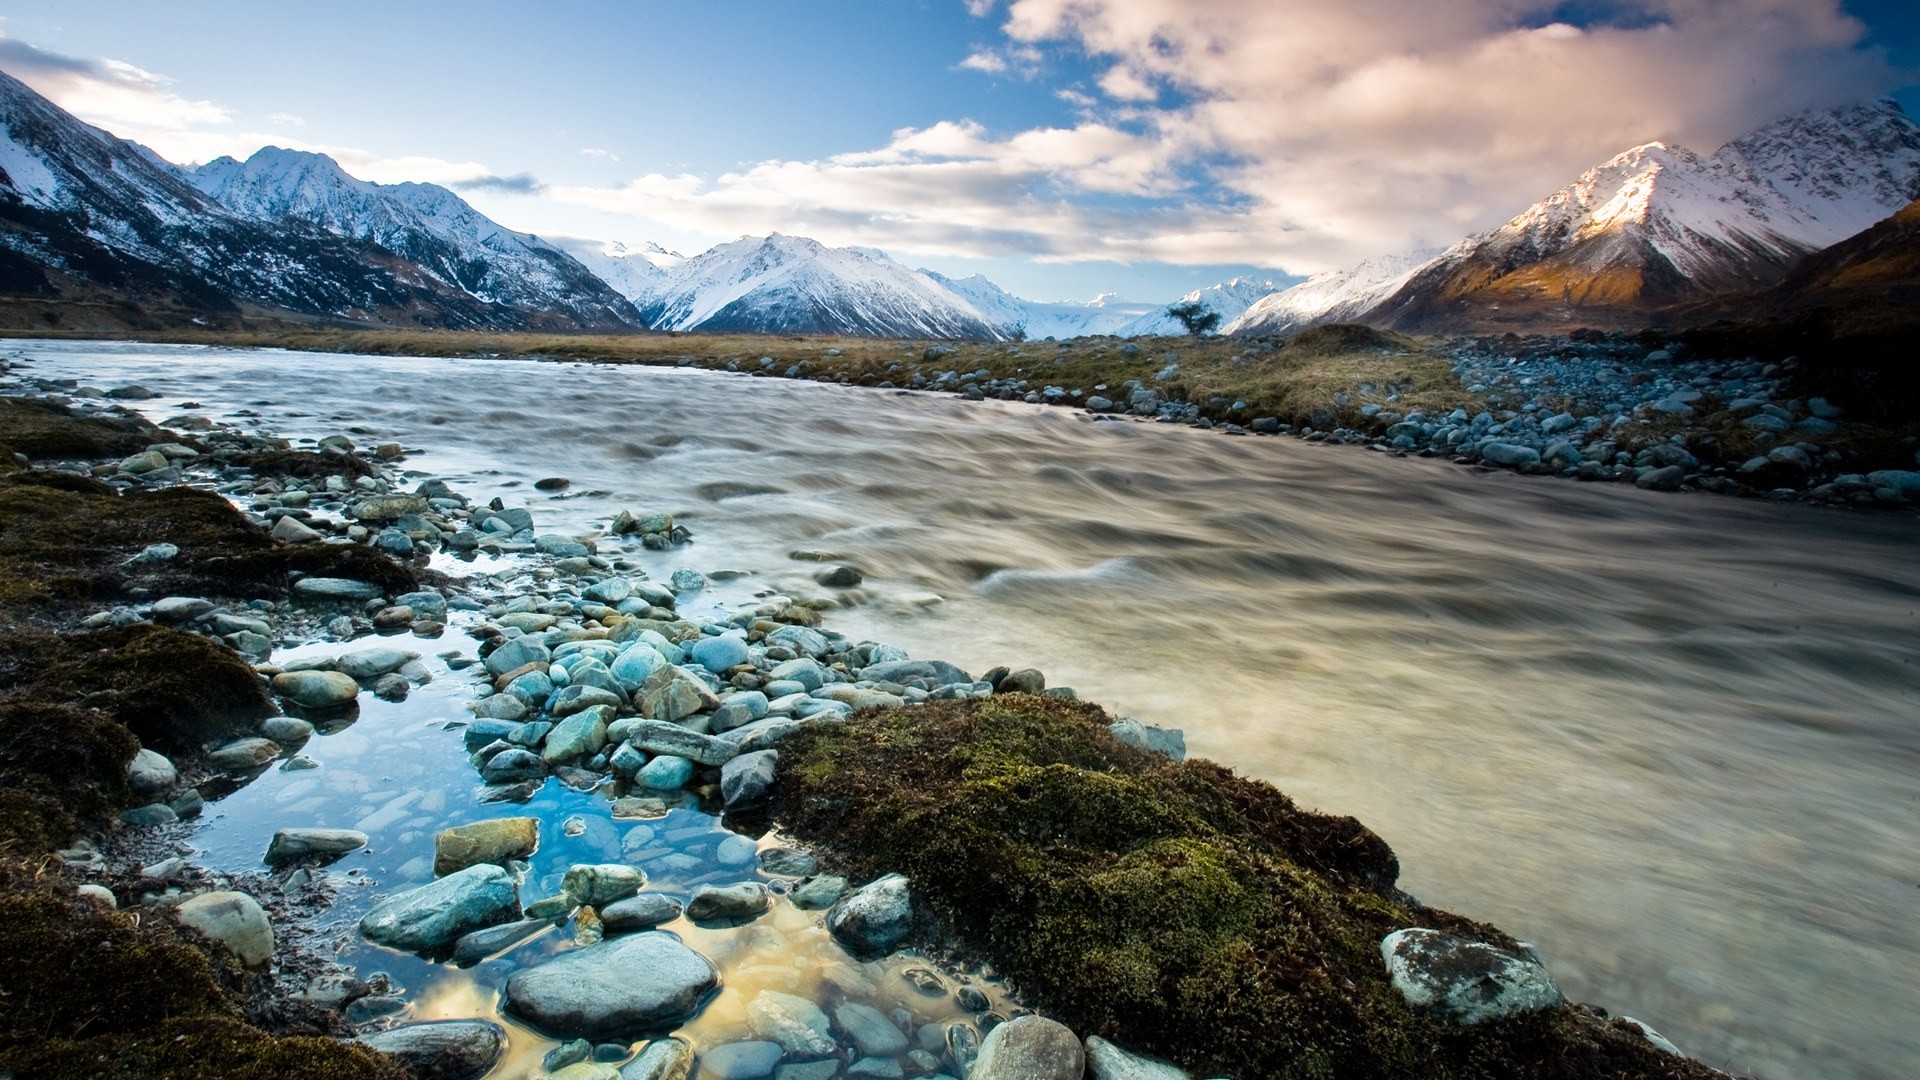 General 1920x1080 nature landscape New Zealand mountains clouds hills trees water river snow rocks long exposure